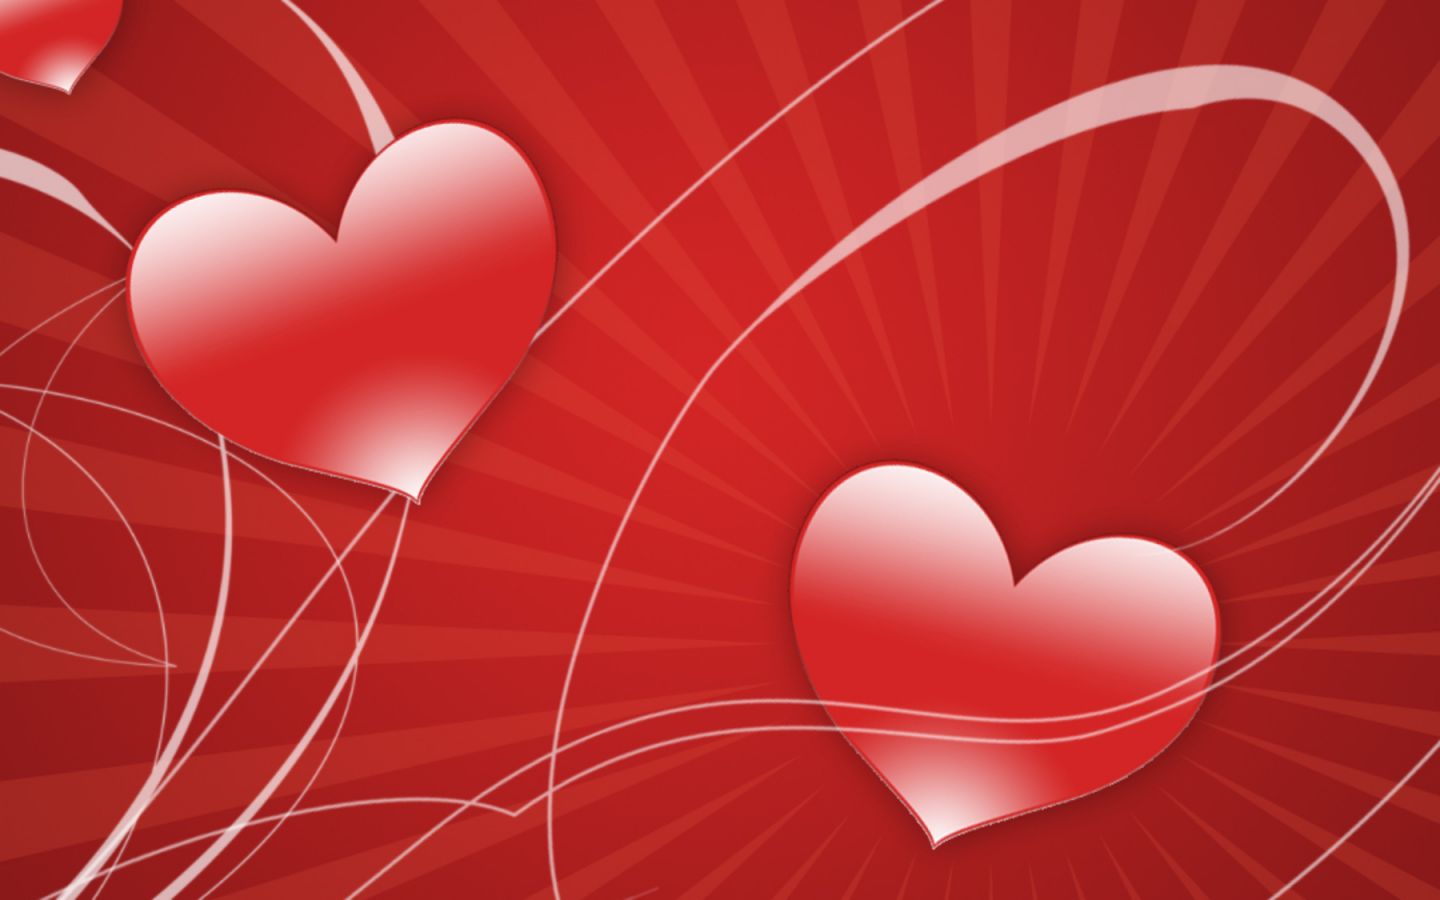 Heart Wallpapers, Animated Heart Wallpaper, 1440x900, #2643